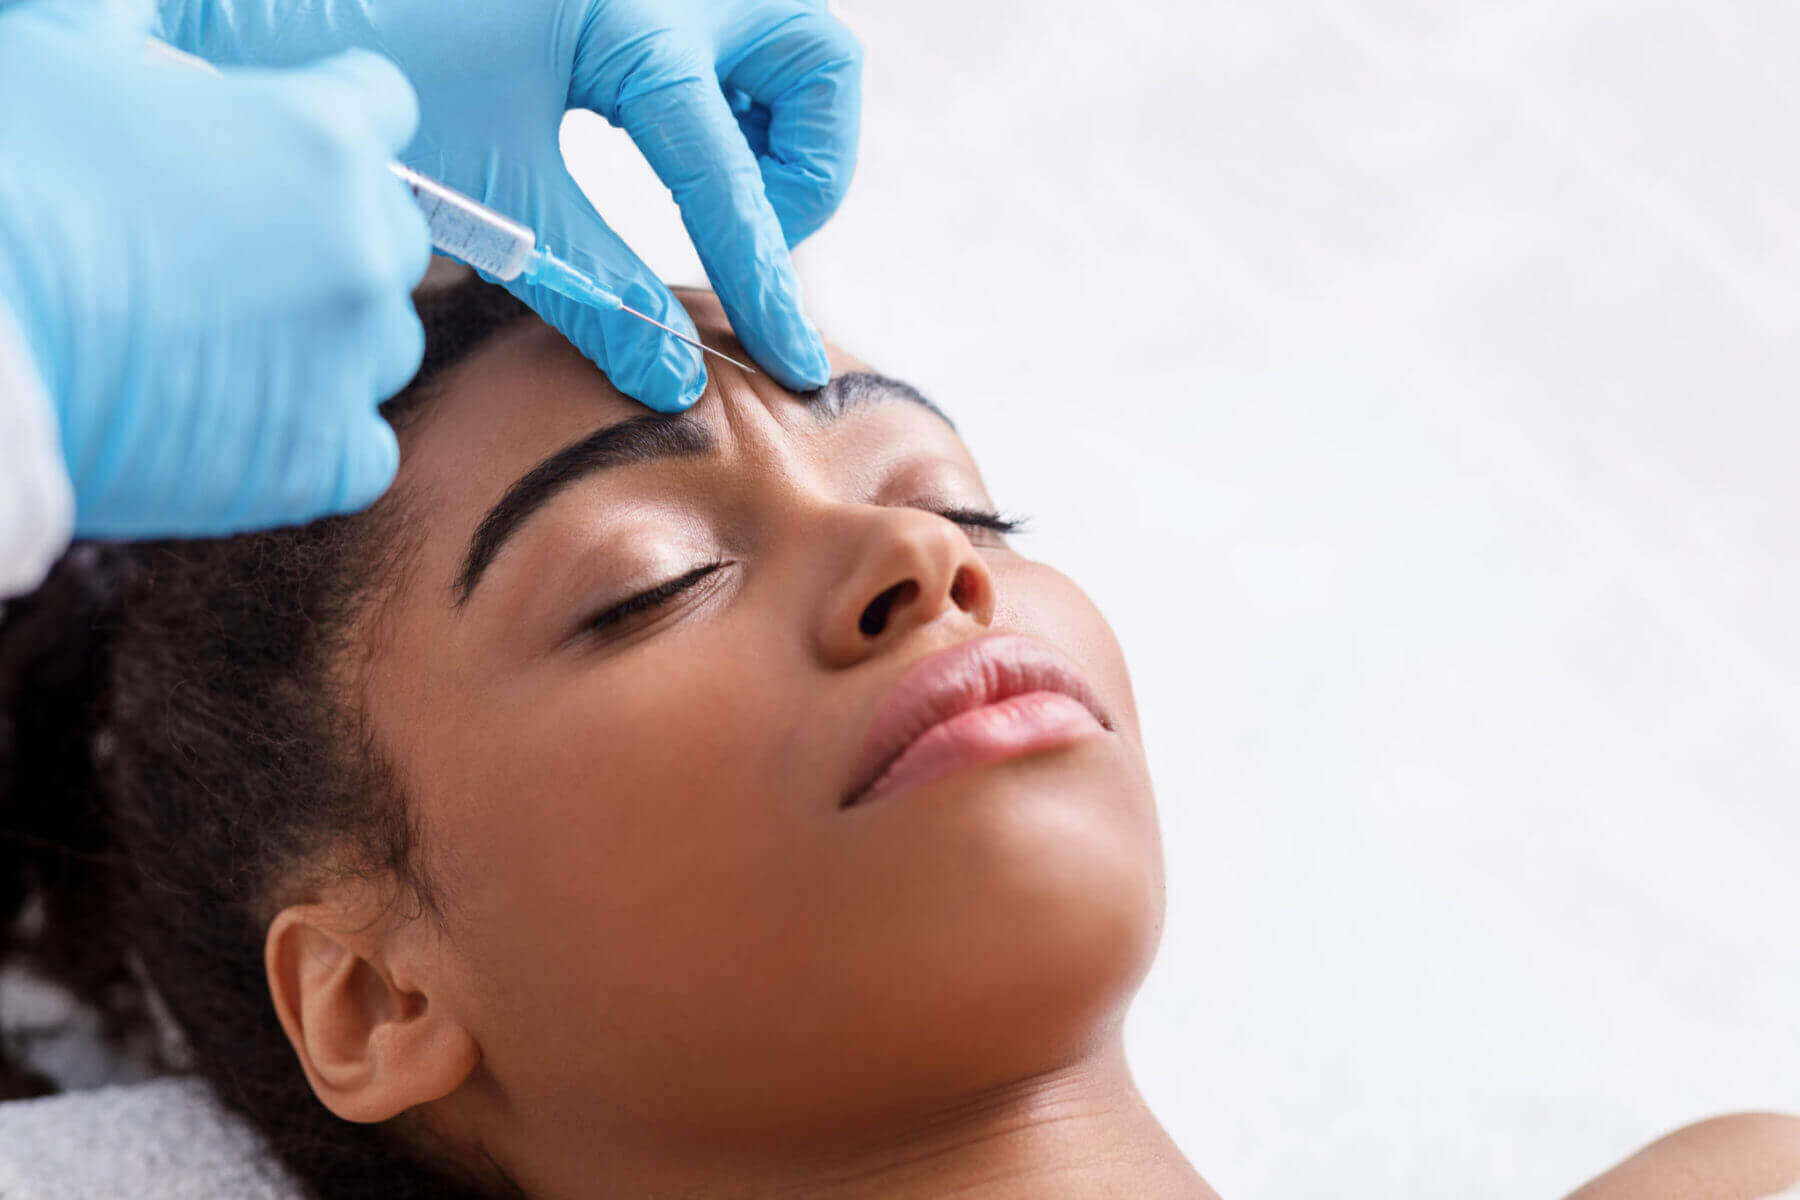 woman getting botox injections in forehead